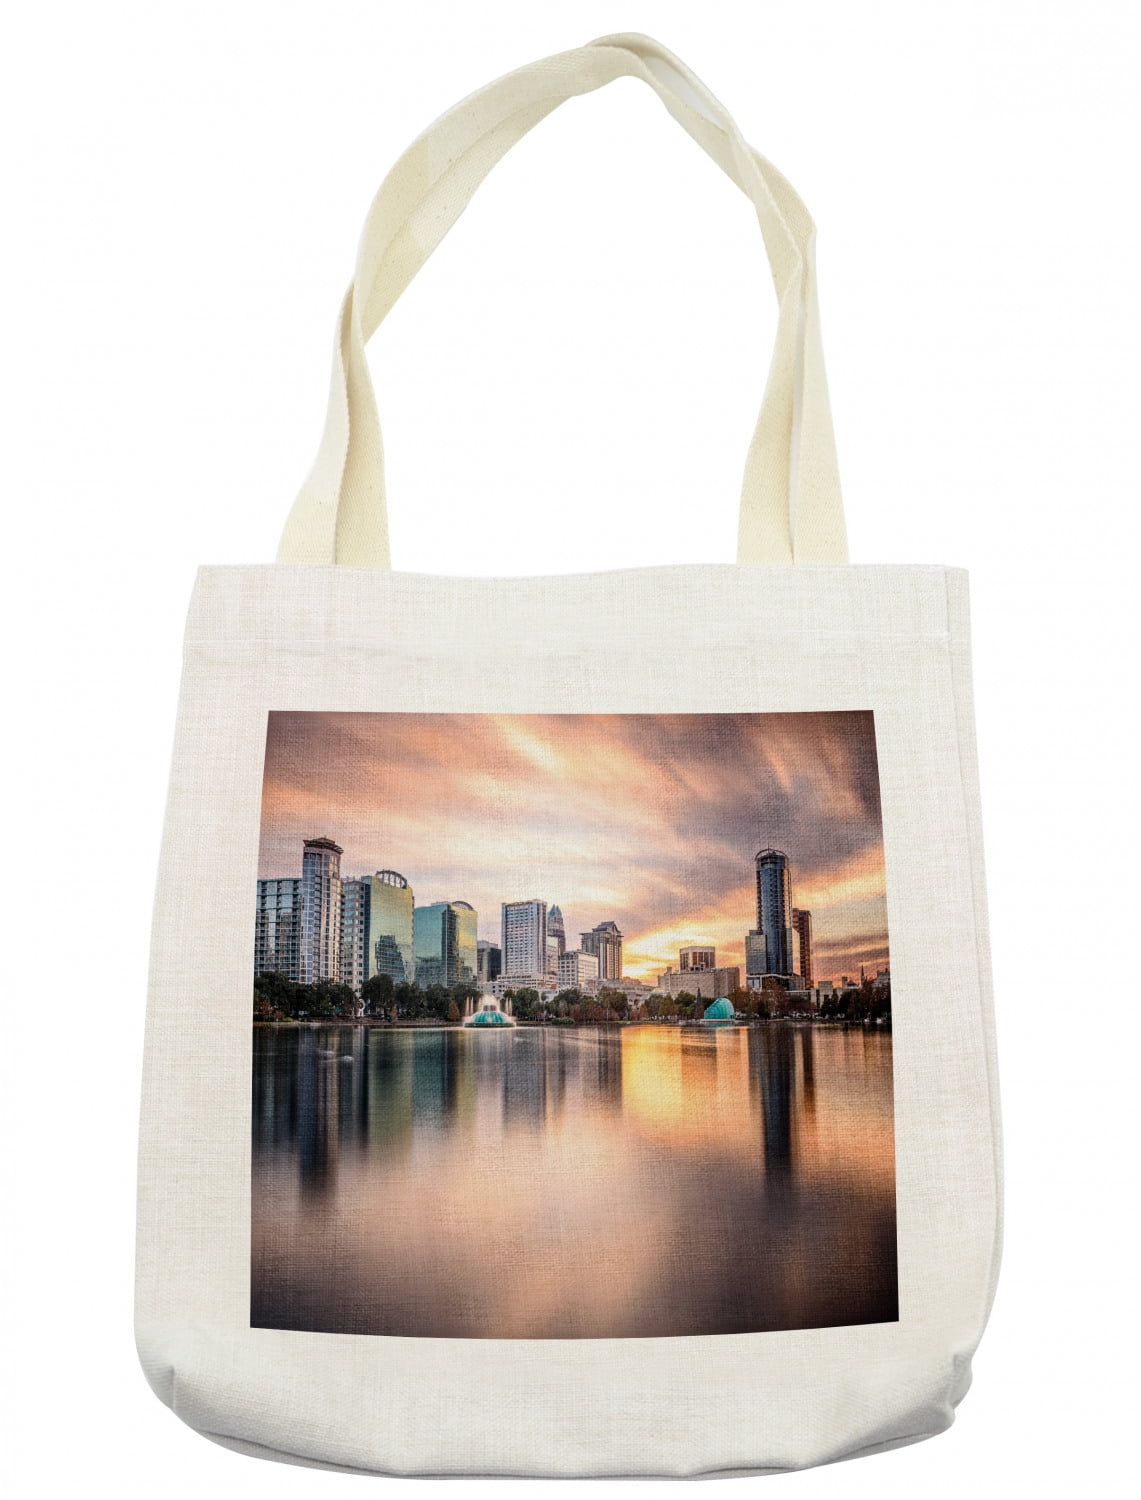 American Tote Bag, USA Florida Downtown City Skyline View from the Lake  Foggy Scenic Panorama, Cloth Linen Reusable Bag for Shopping Books Beach  and 